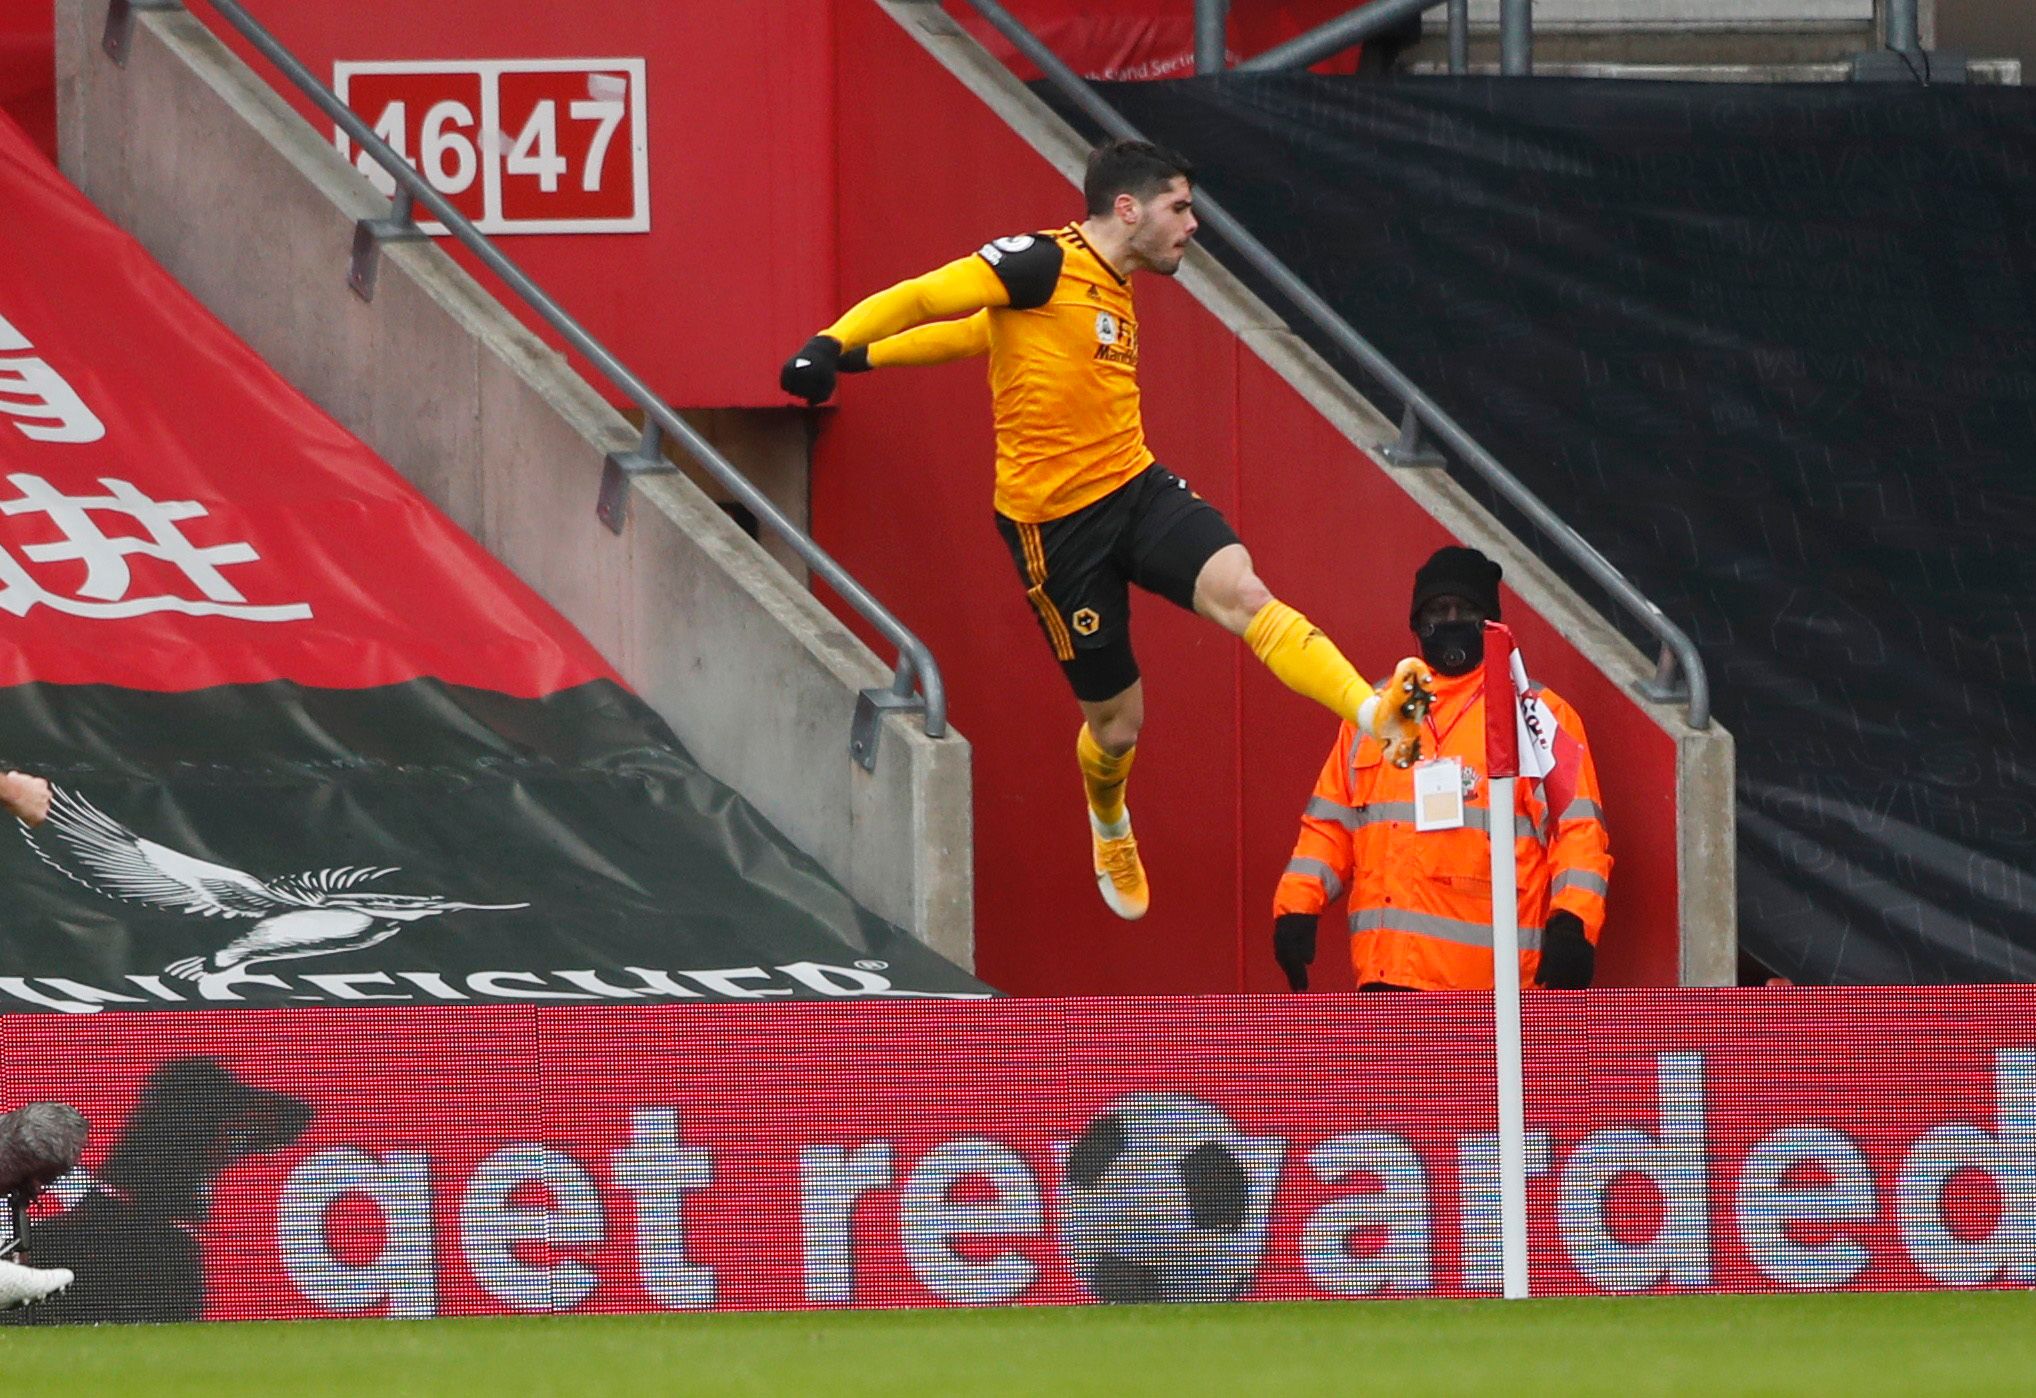 Soccer Football - Premier League - Southampton v Wolverhampton Wanderers - St Mary's Stadium, Southampton, Britain - February 14, 2021 Wolverhampton Wanderers' Pedro Neto celebrates scoring their second goal Pool via REUTERS/Frank Augstein EDITORIAL USE ONLY. No use with unauthorized audio, video, data, fixture lists, club/league logos or 'live' services. Online in-match use limited to 75 images, no video emulation. No use in betting, games or single club /league/player publications.  Please con